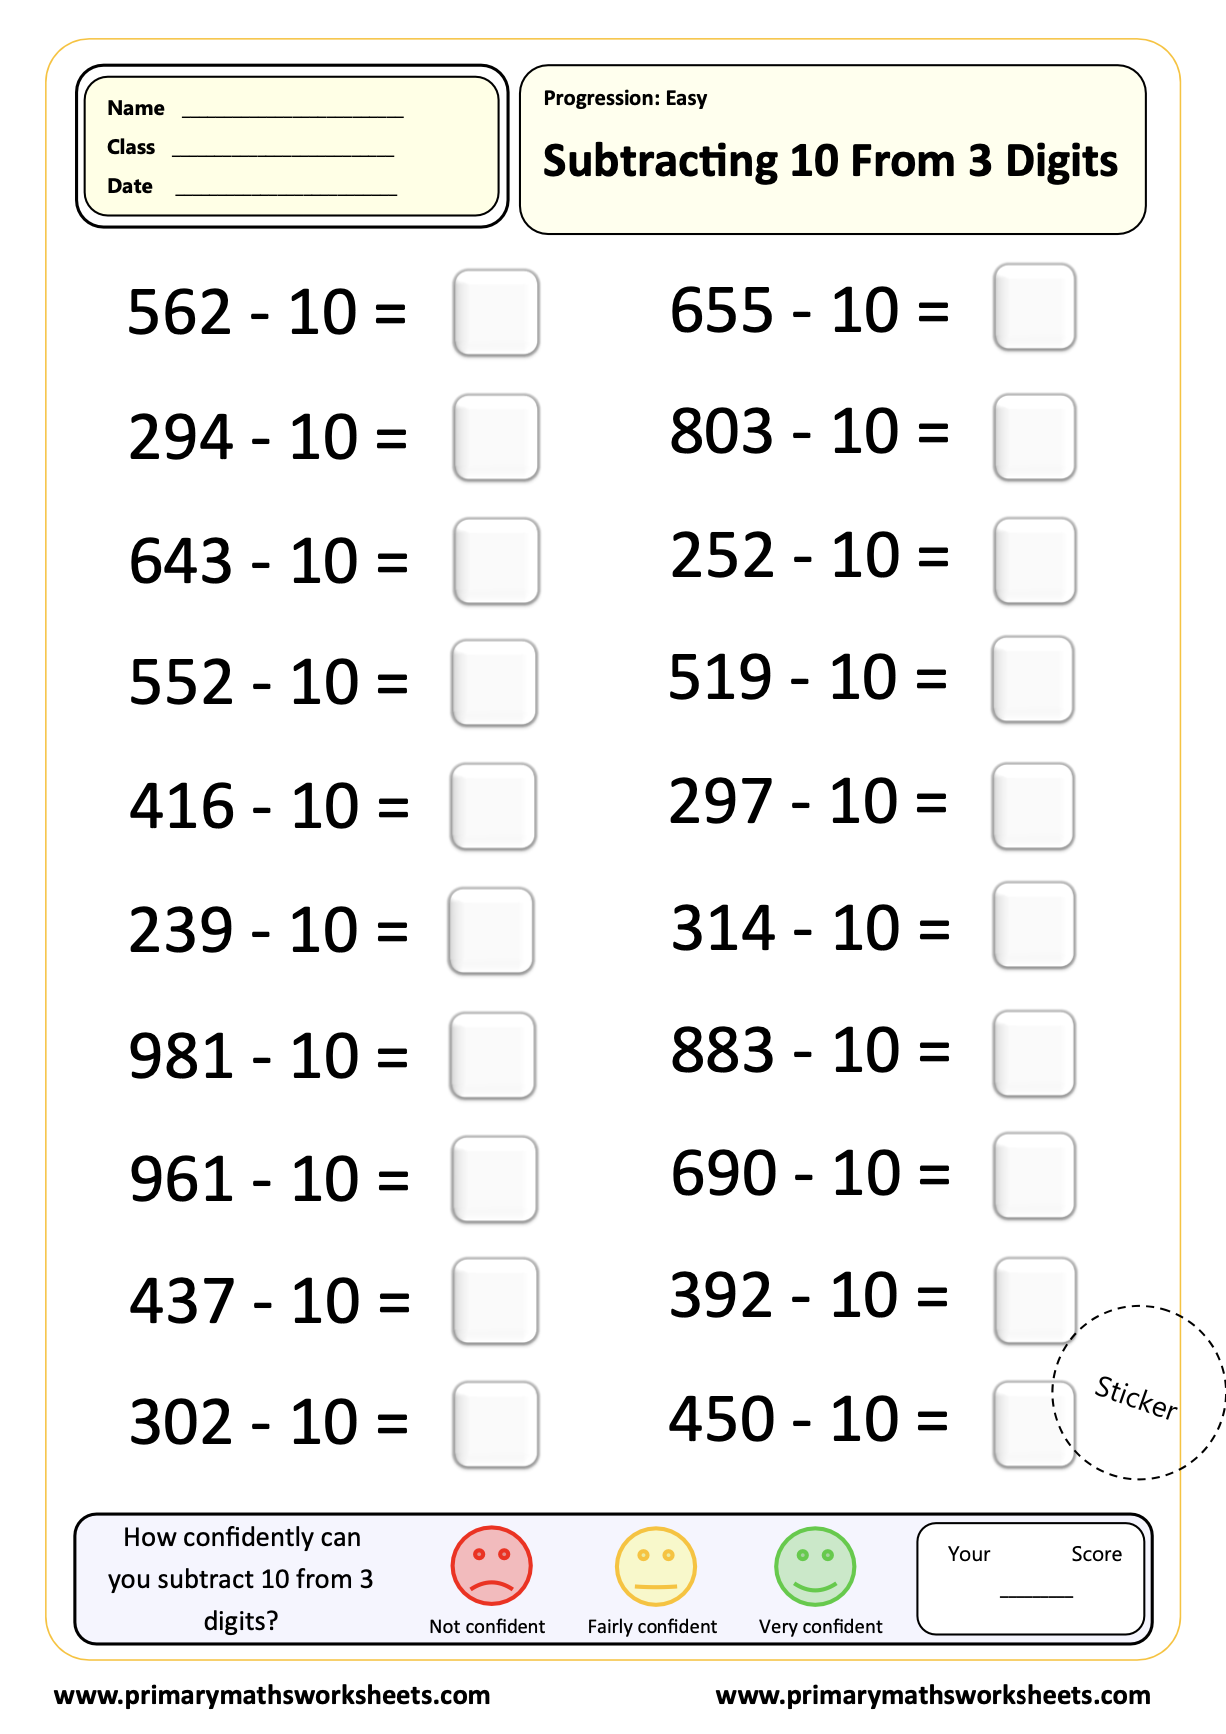 Subtracting 10 from 3 Digits Worksheet